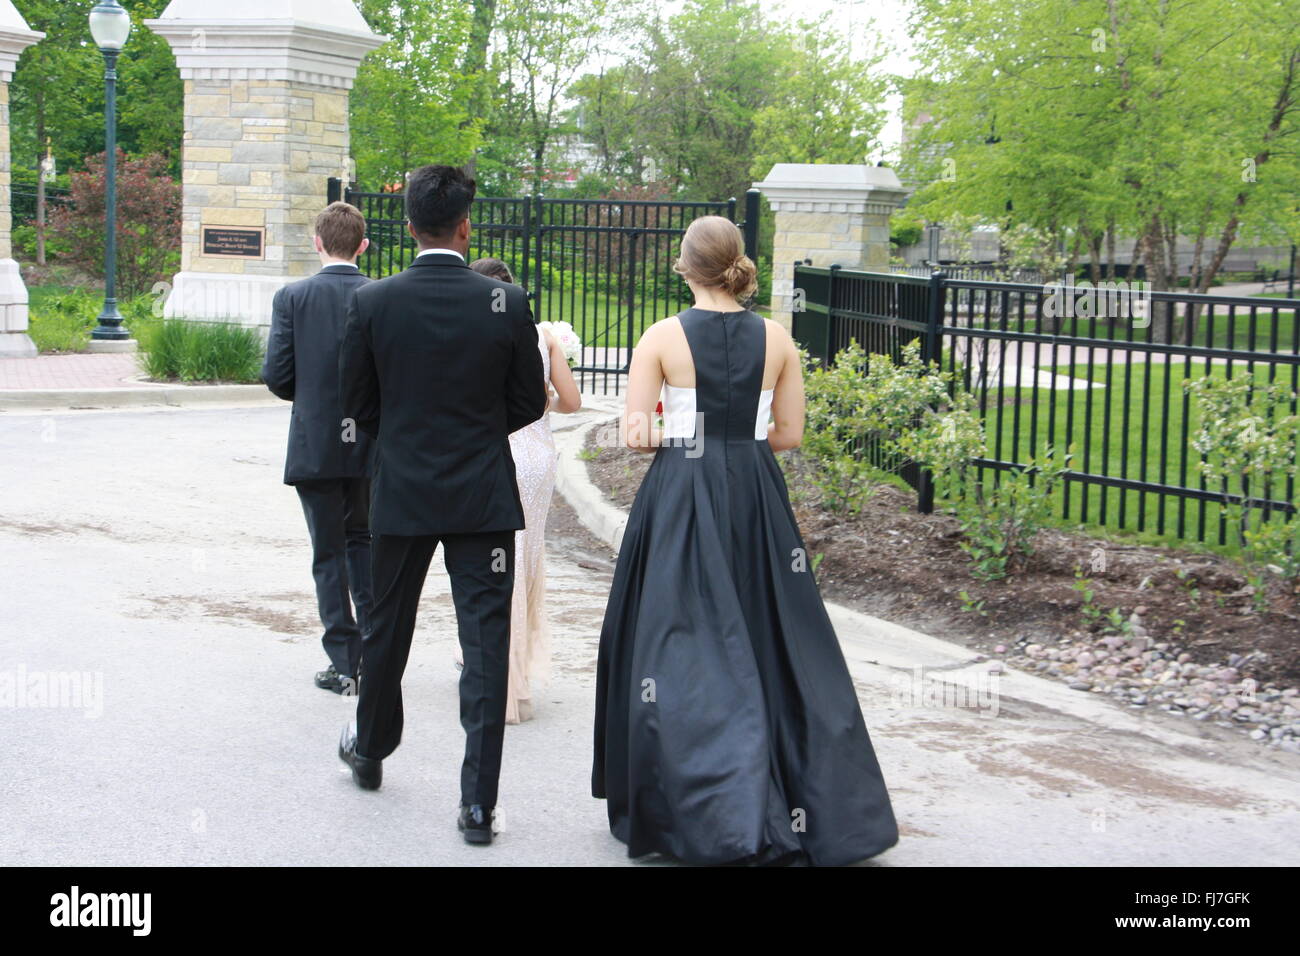 Boston teenagers pose for prom pictures after high school dance